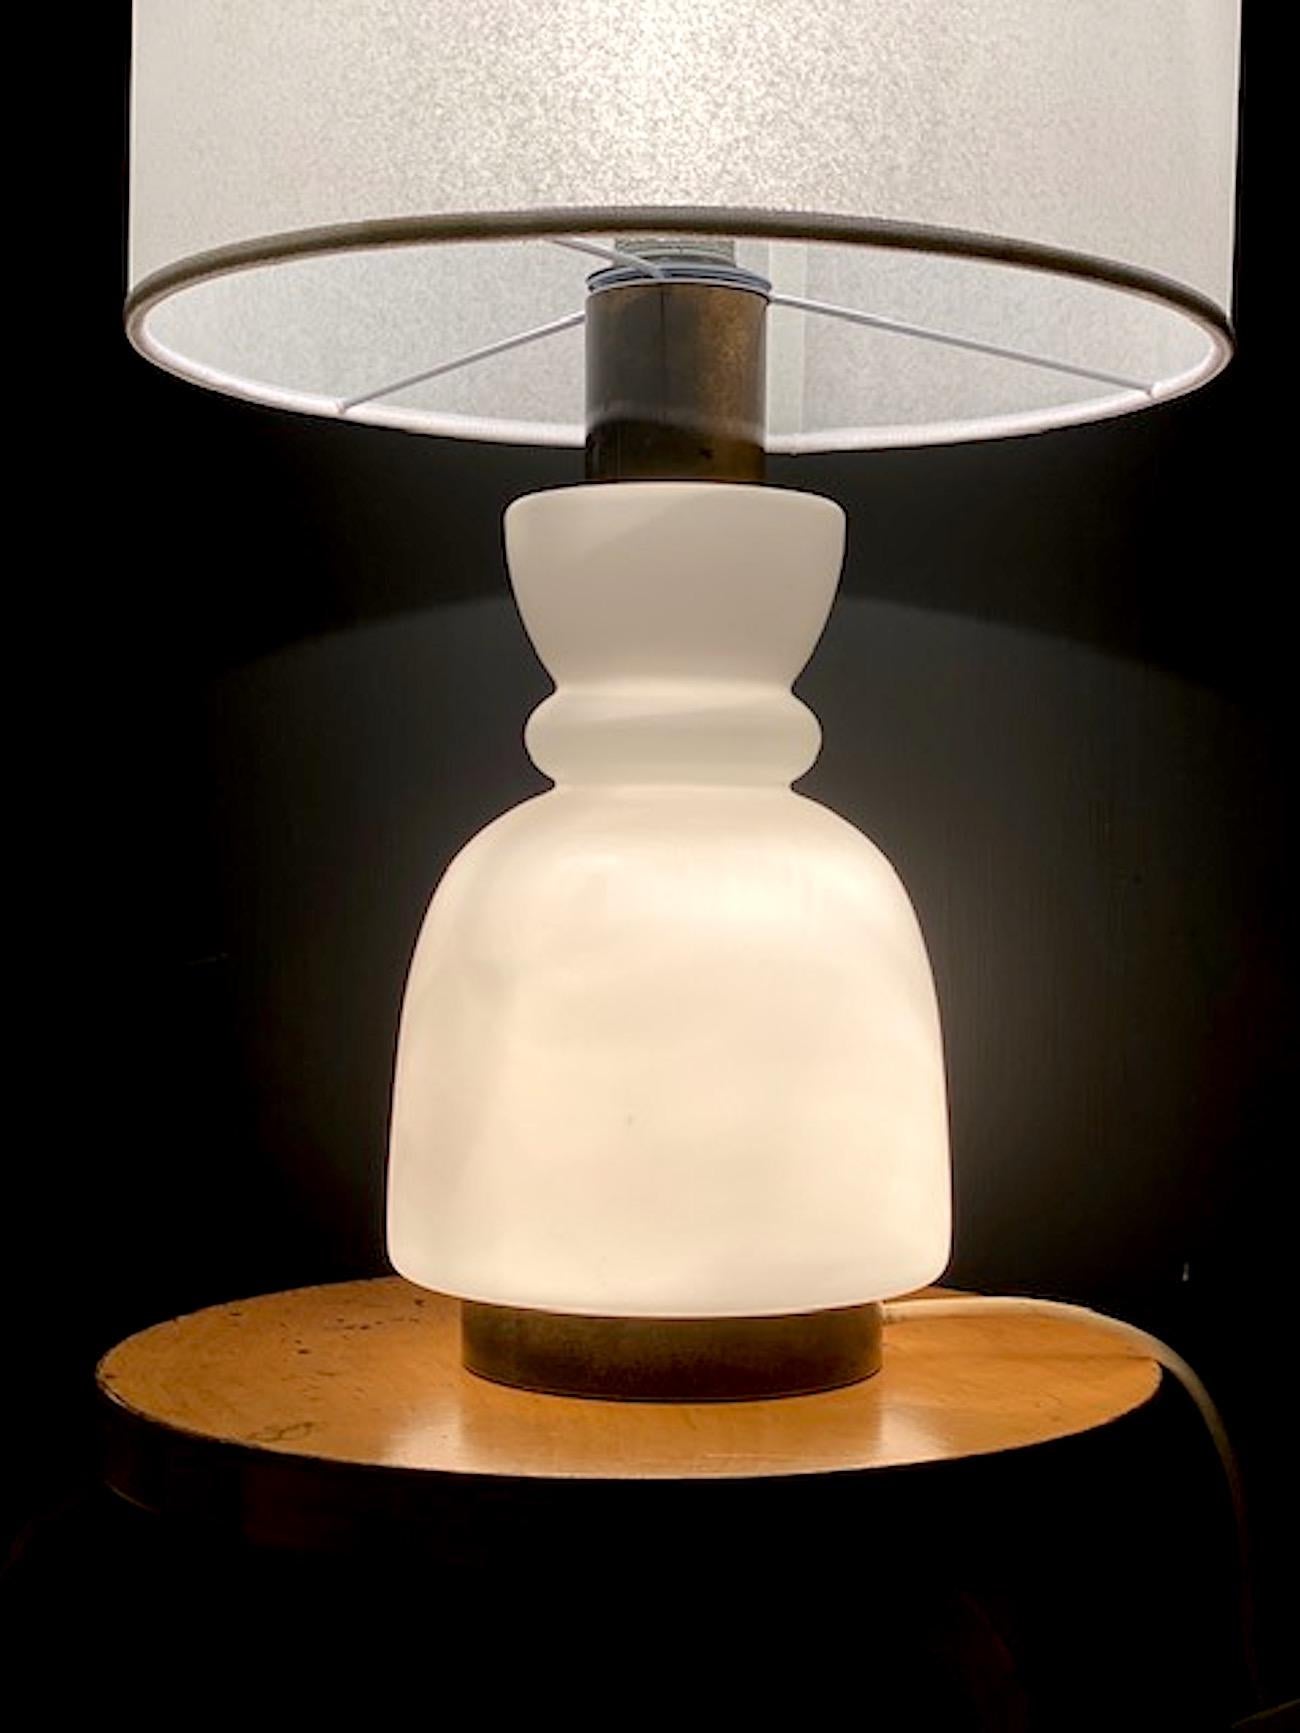 A late 1950s to 1960s Italian glass and brass table lamp attributed to the well known lighting company Stilnovo. The base lights up and is made of blown case glass in a vase shape. The lamp has brass mounts with original untouched patina.. Interior